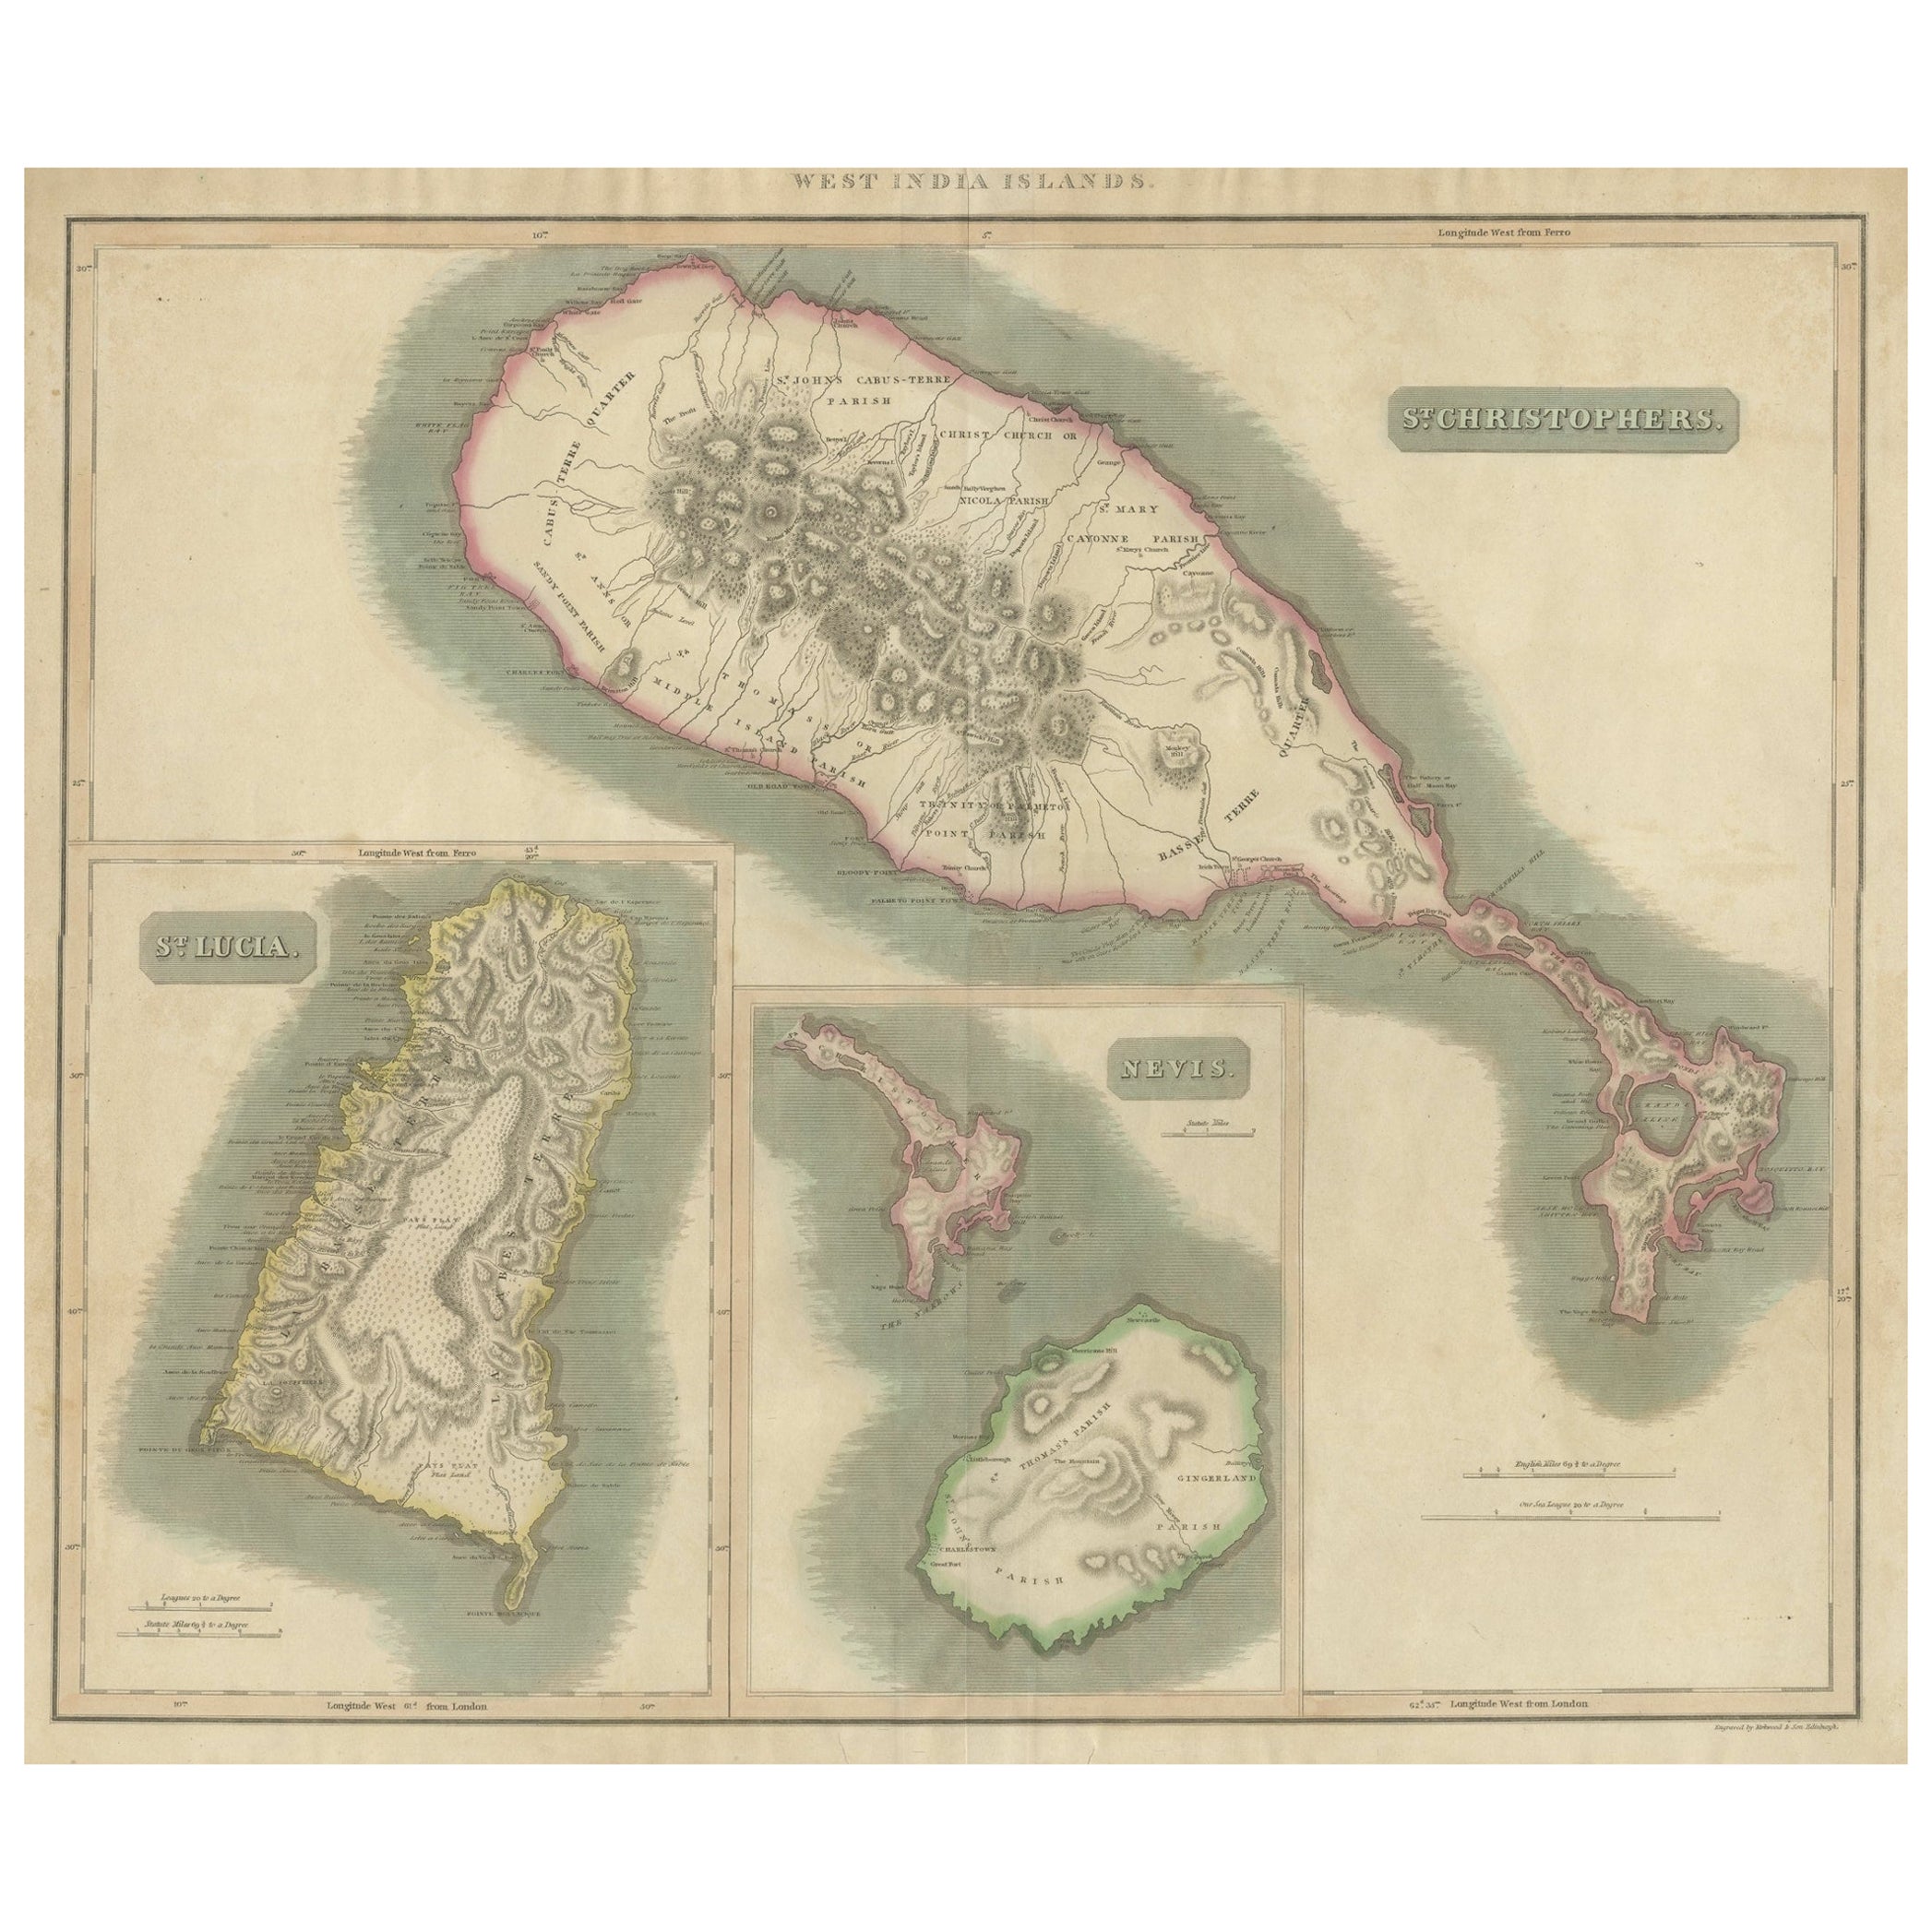 1817 John Thomson's Handcolored Antique Map of St. Kitts, Nevis, and St. Lucia  For Sale